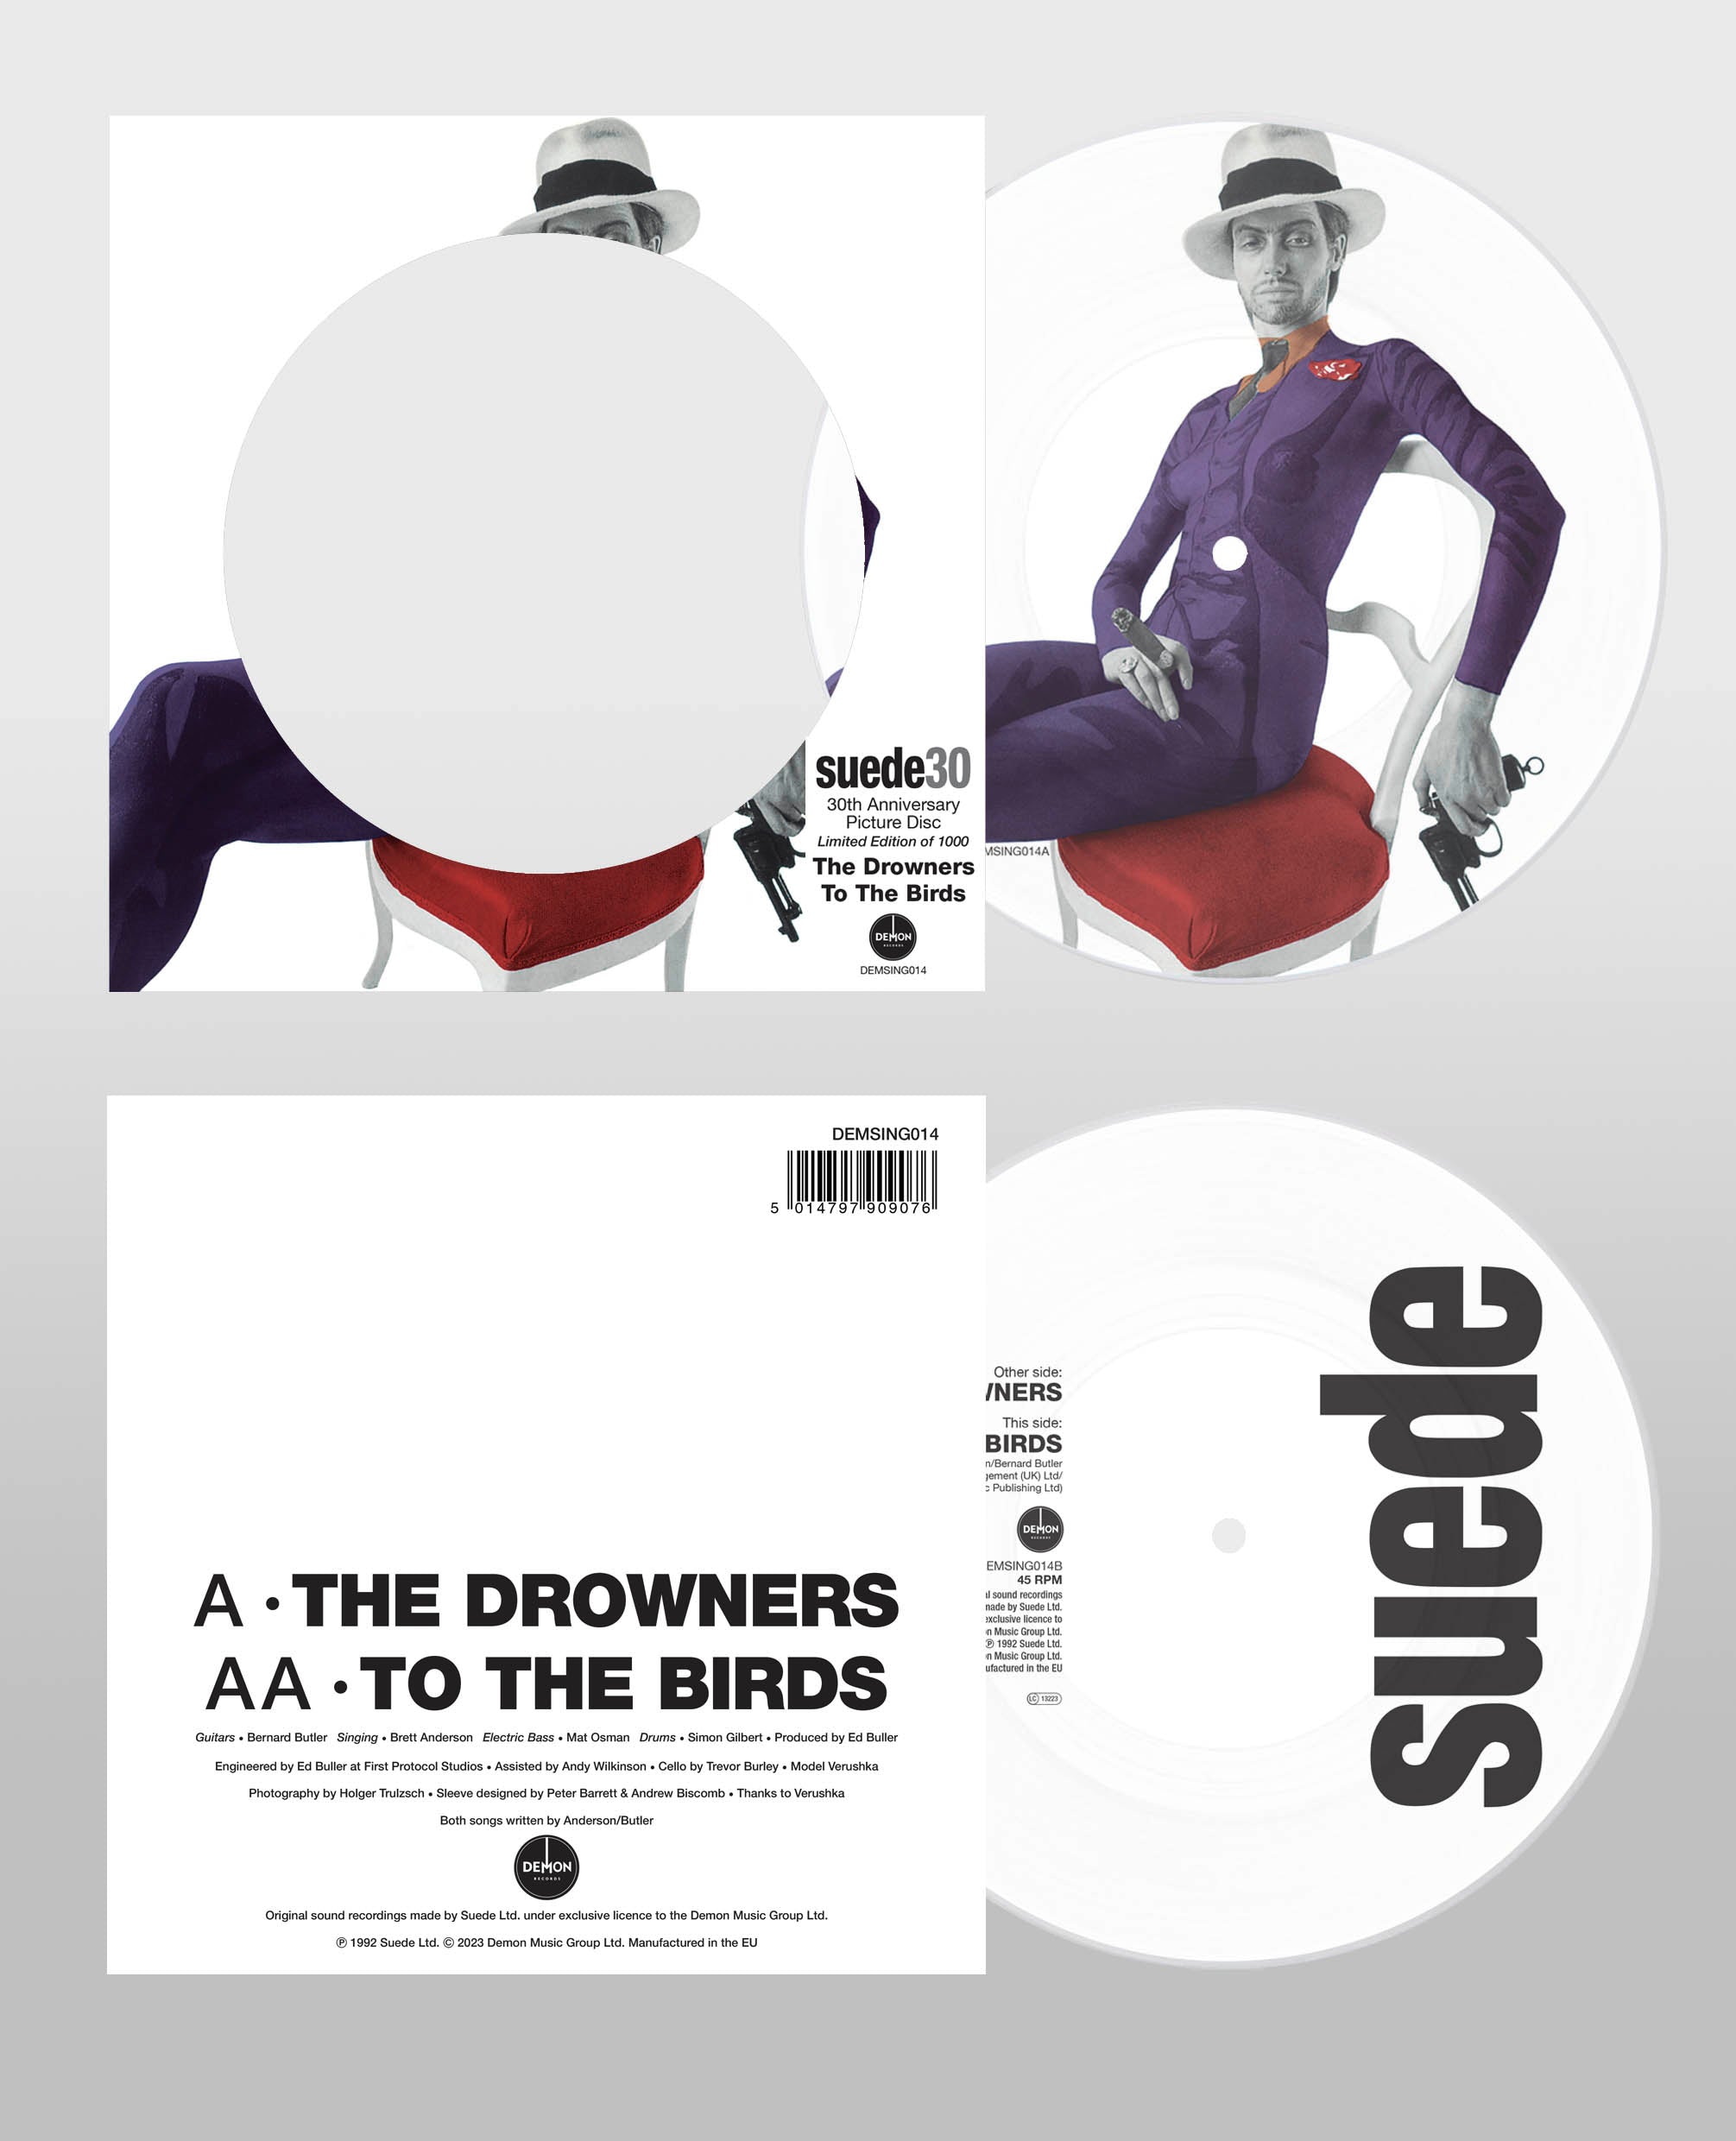 The Drowners (30th Anniversary Edition): Vinyl 7" Picture Disc